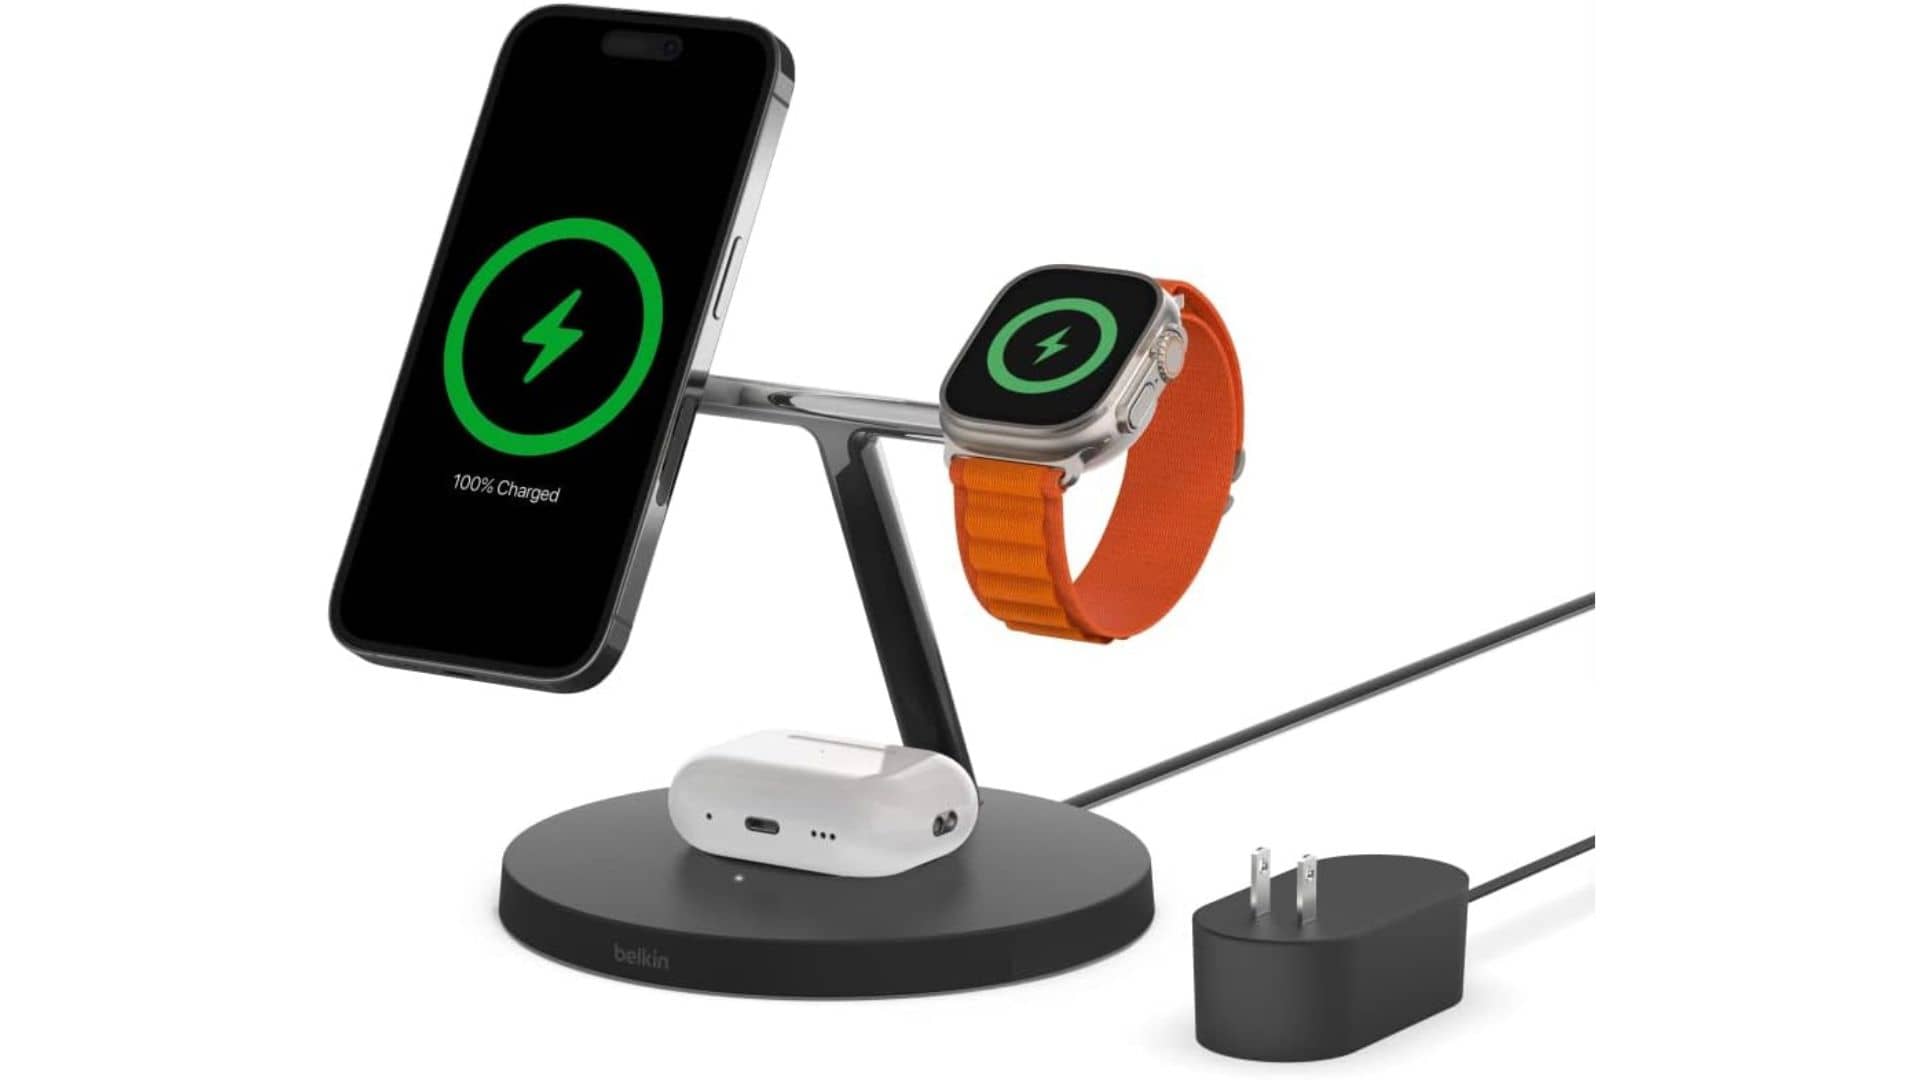 Belkin MagSafe 3-in-1 Wireless Charging Stand - The Premium iPhone Charger